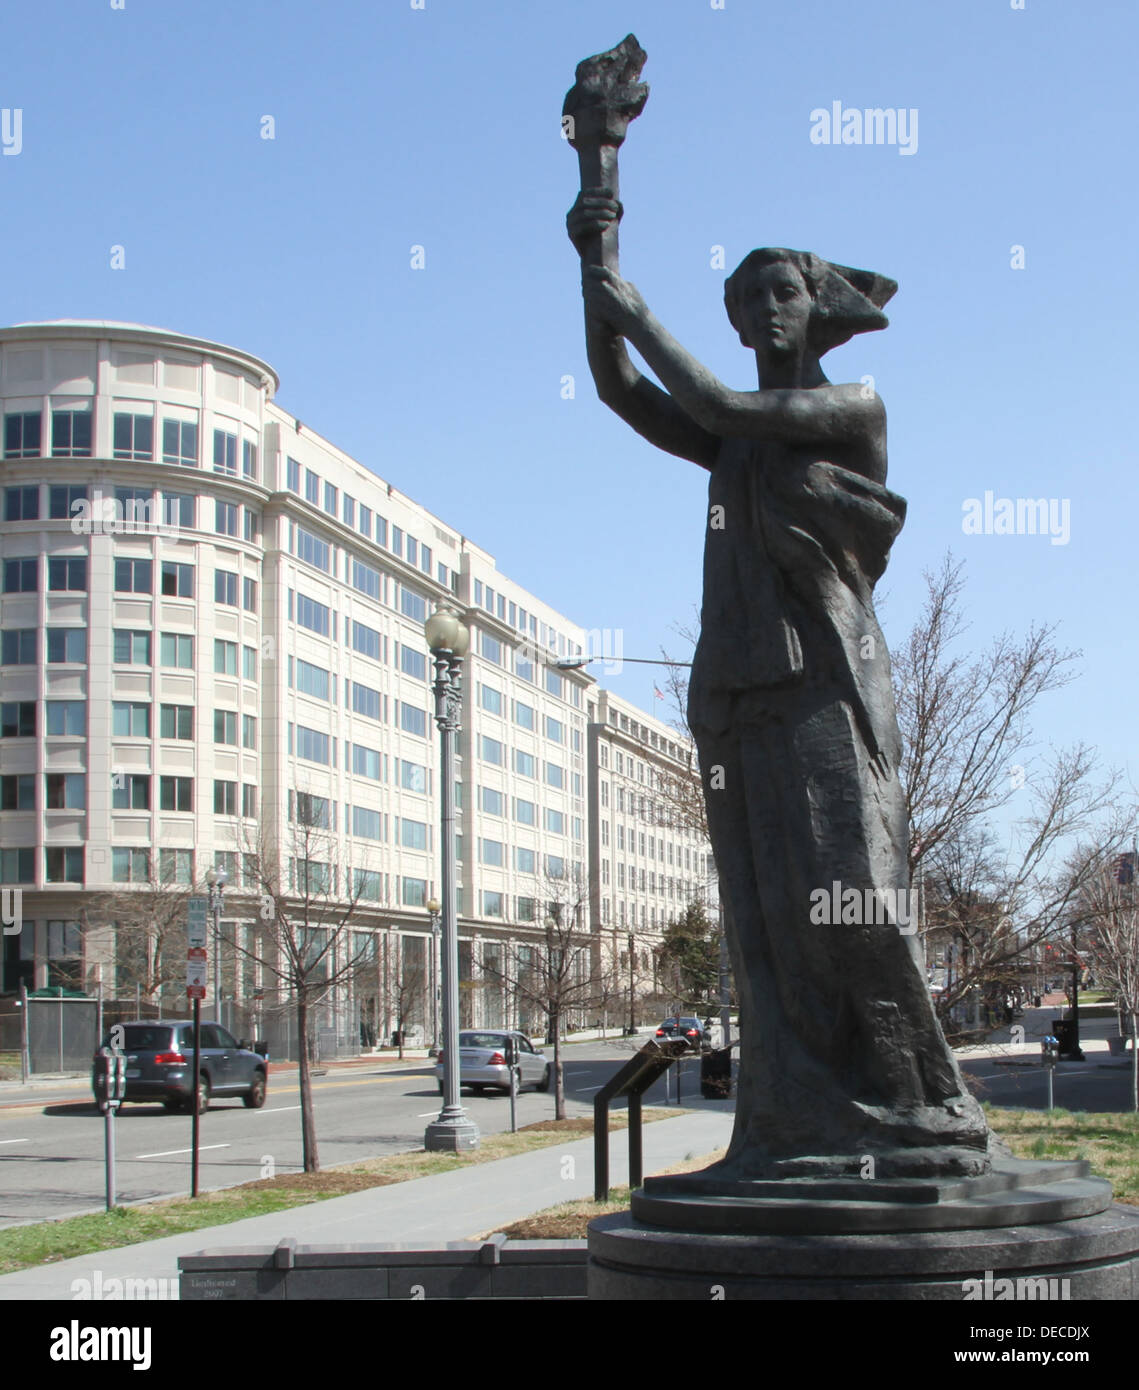 Victims of Communism Memorial in Washington DC. This is a recreation by Thomas Marsh of the statue 'Goddess of Democracy' that was the symbol of the protestors erected in Tianamen Square in 1989 and brutally destroyed by the PRC Communist government. Stock Photo